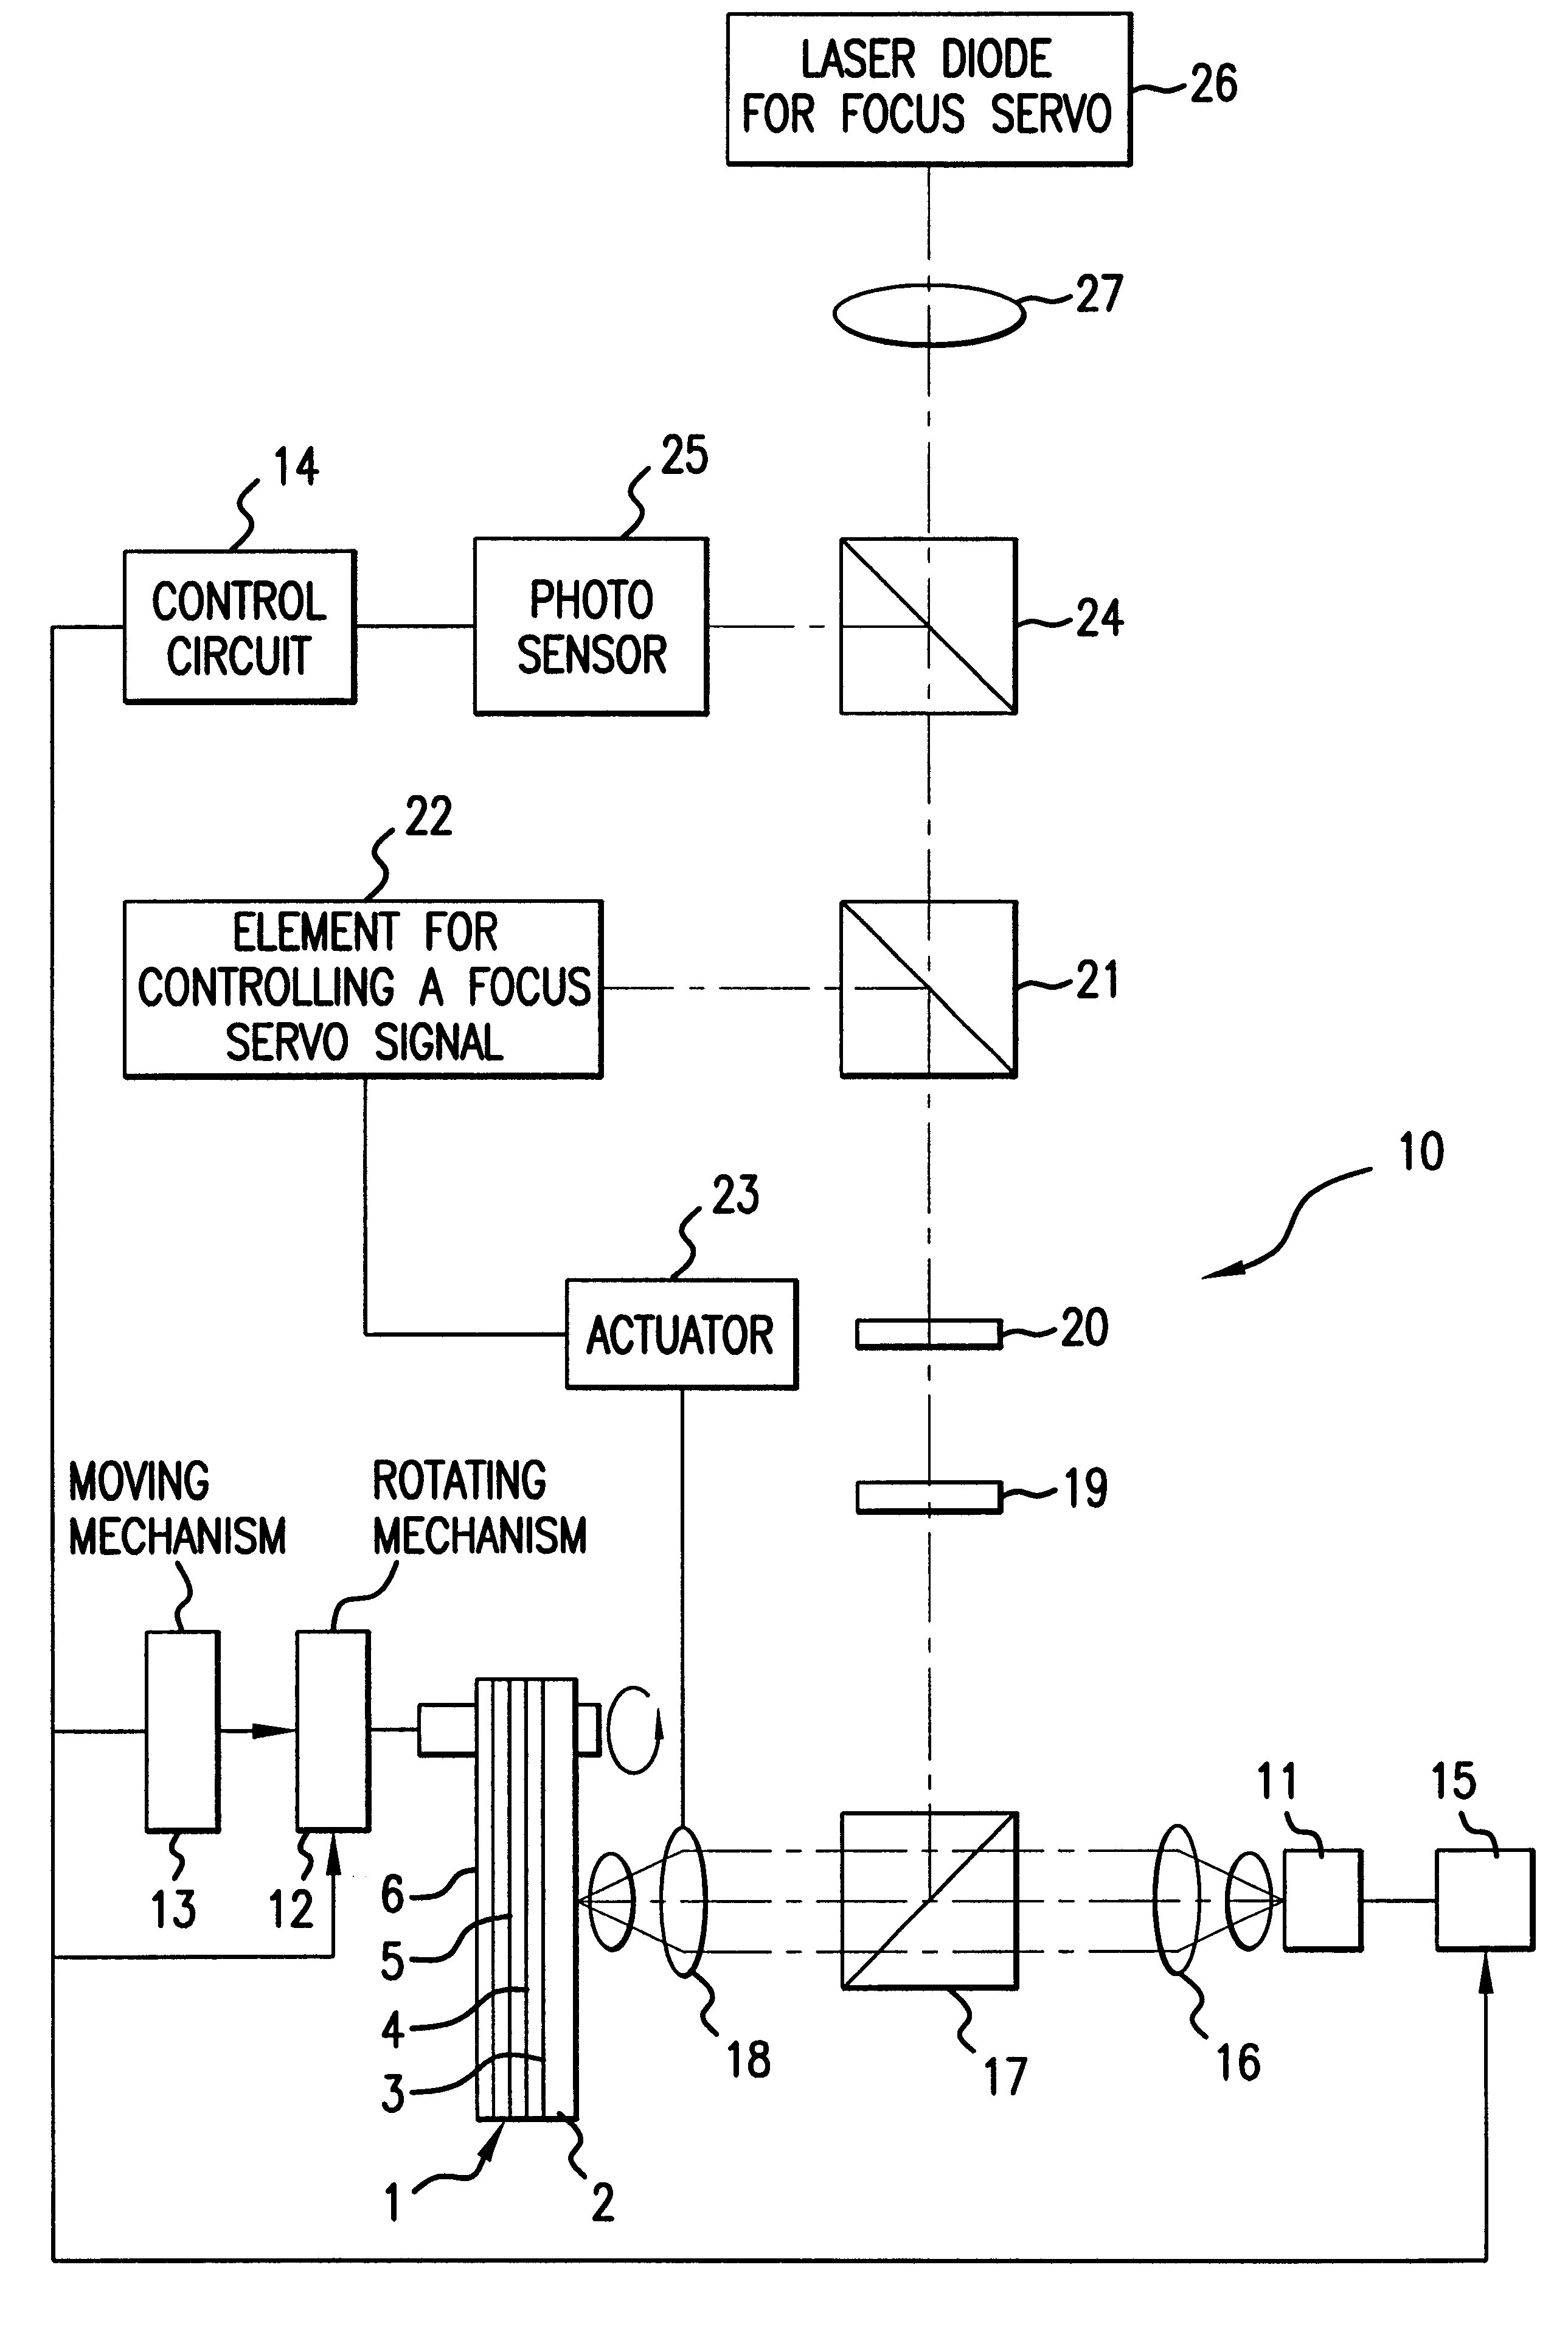 Method and apparatus for initializing optical recording media